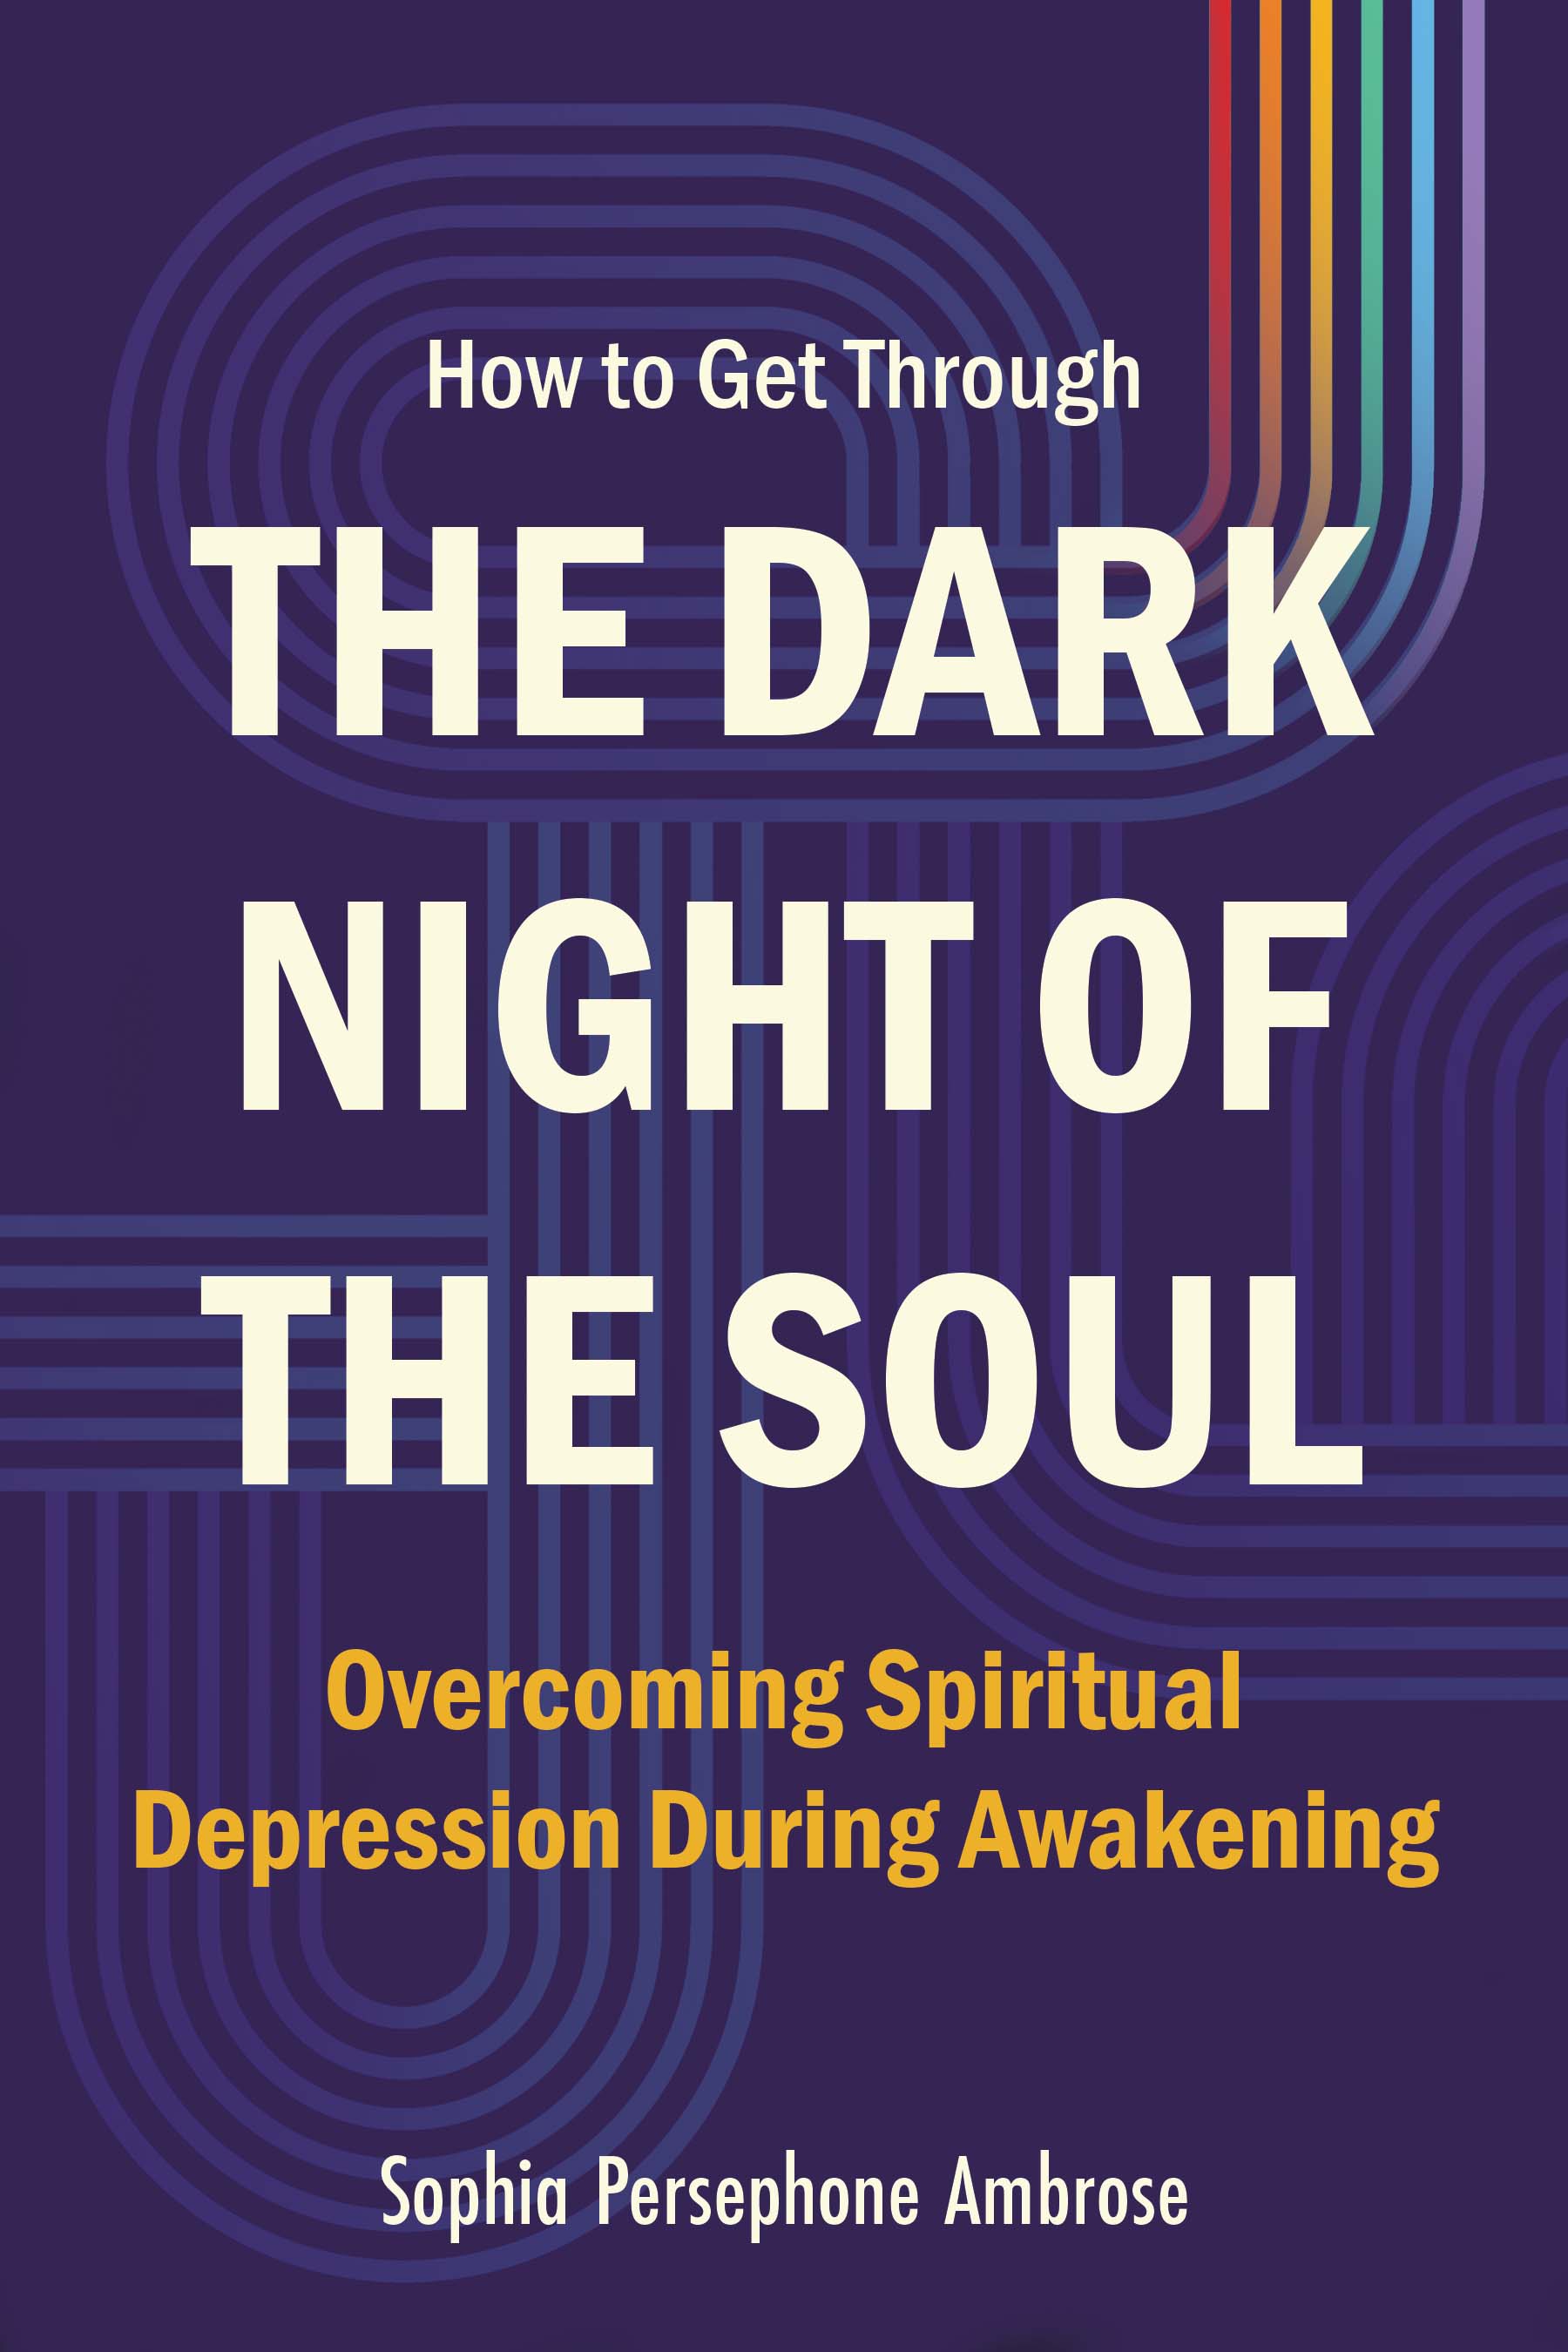 How to get through the Dark Night of the Soul book cover with the title in bold type on a purple background.<br />
